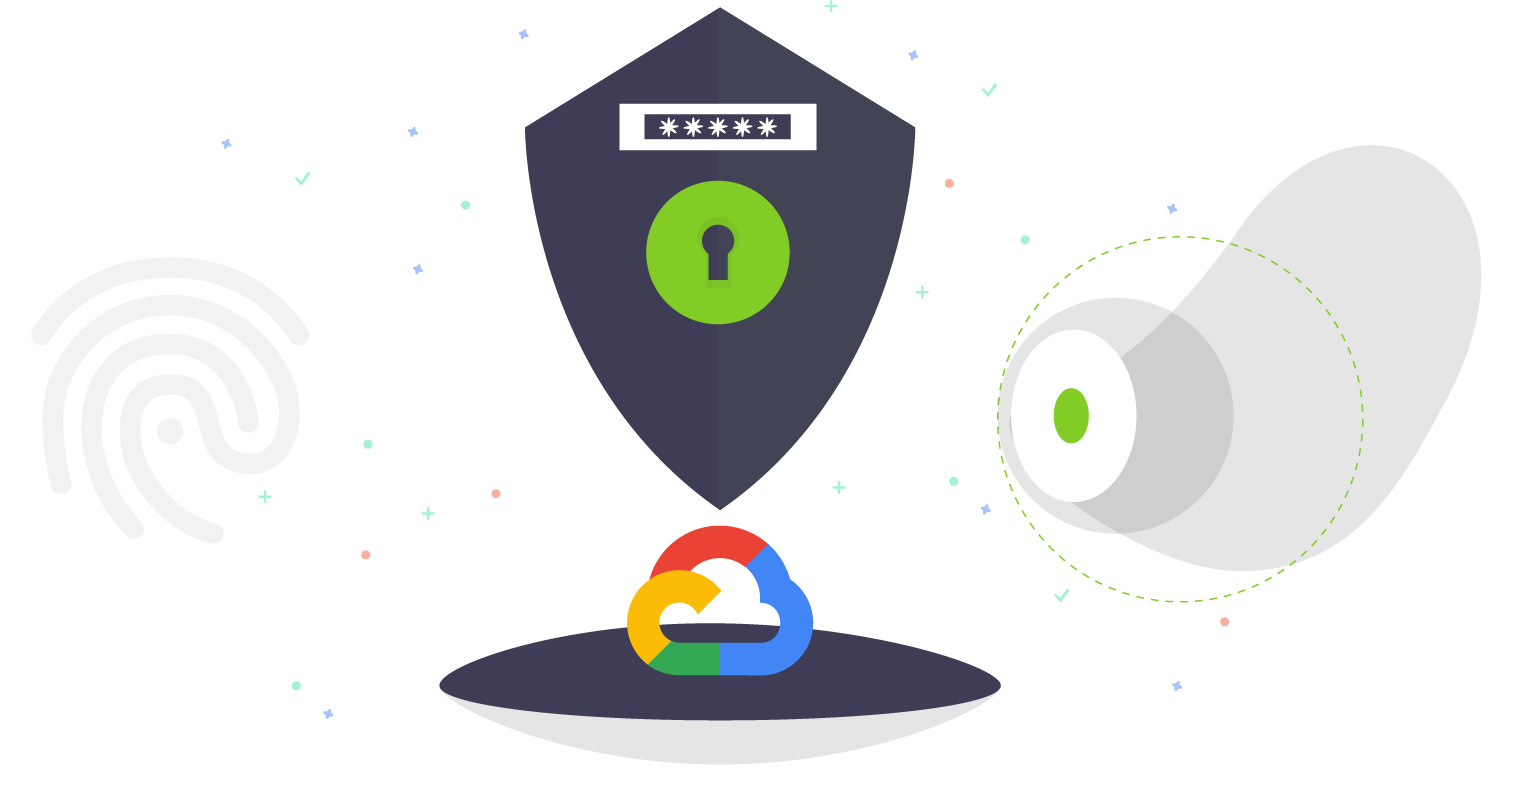 GCP Secret Manager - First Look (Photo by Chris Barbalis https://unsplash.com/@cbarbalis)